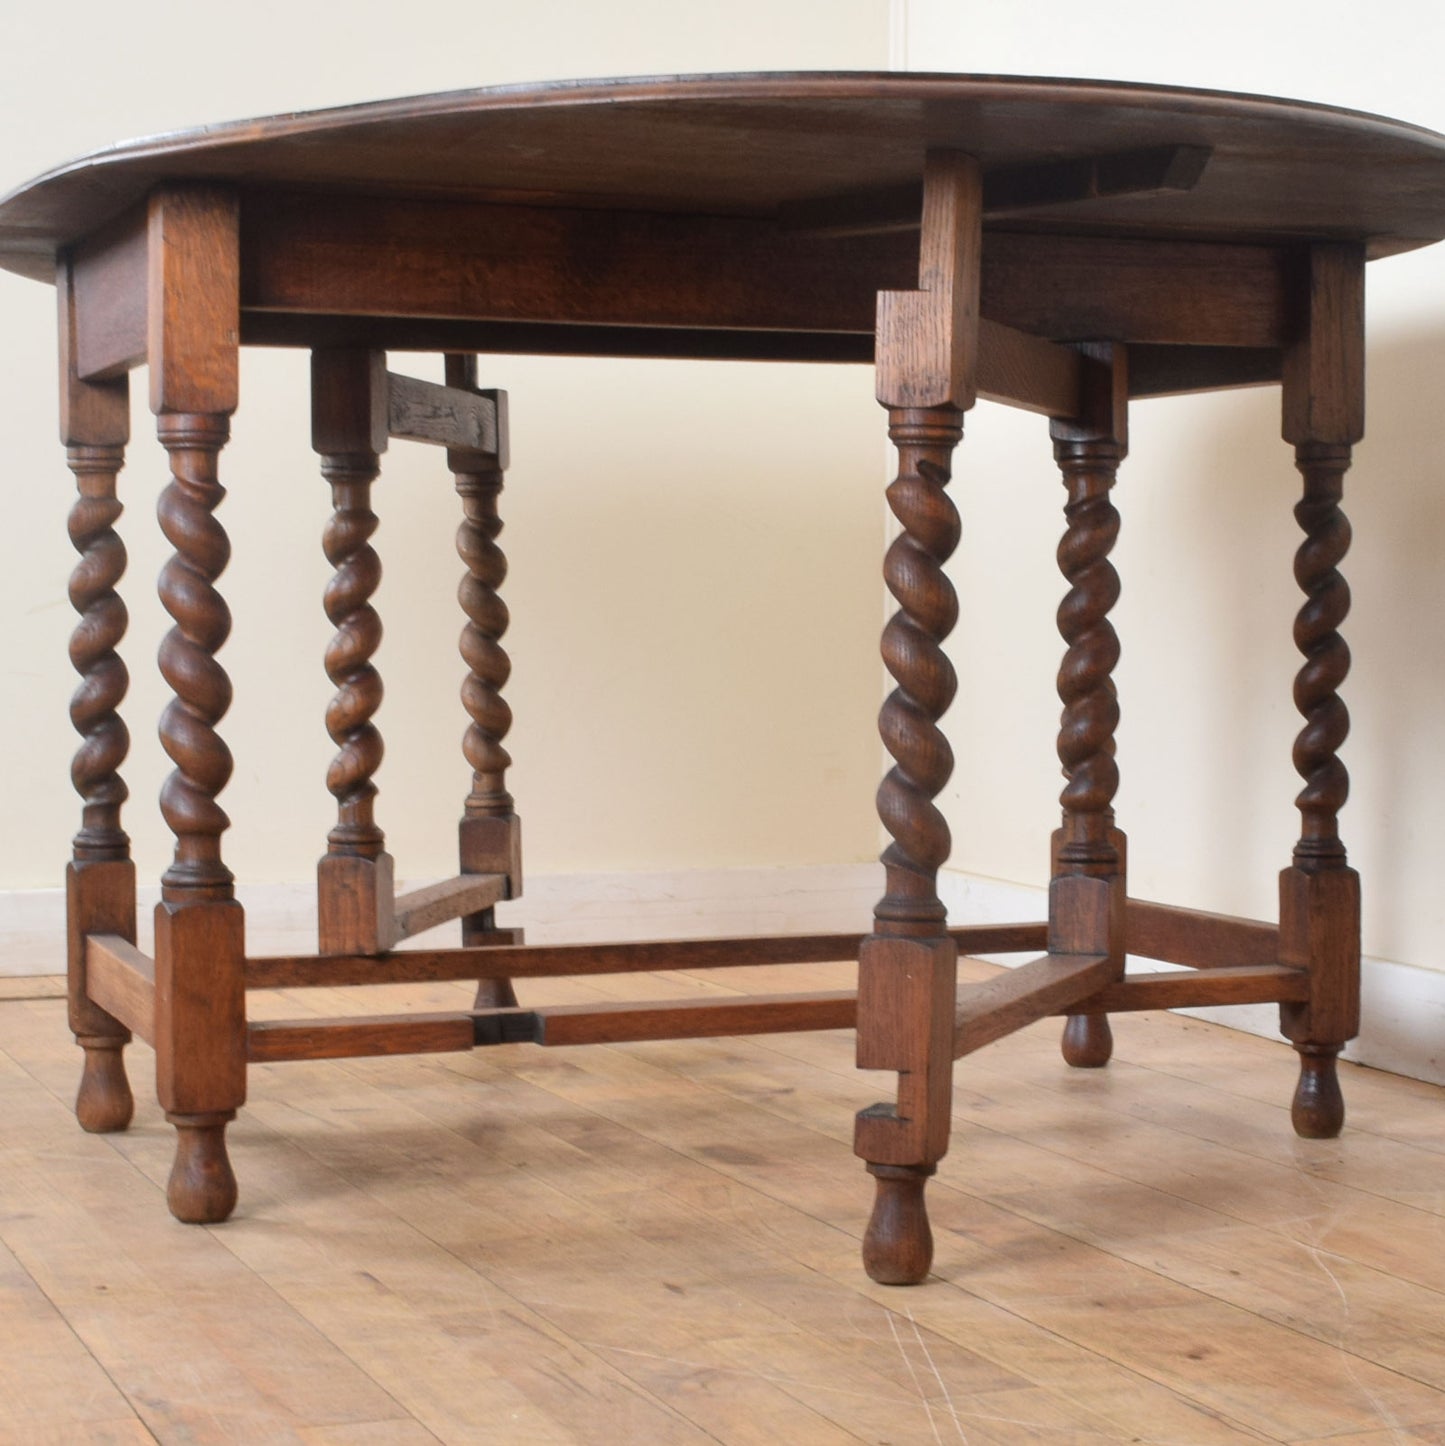 Barley-Twist Drop Leaf Table and Four Chairs